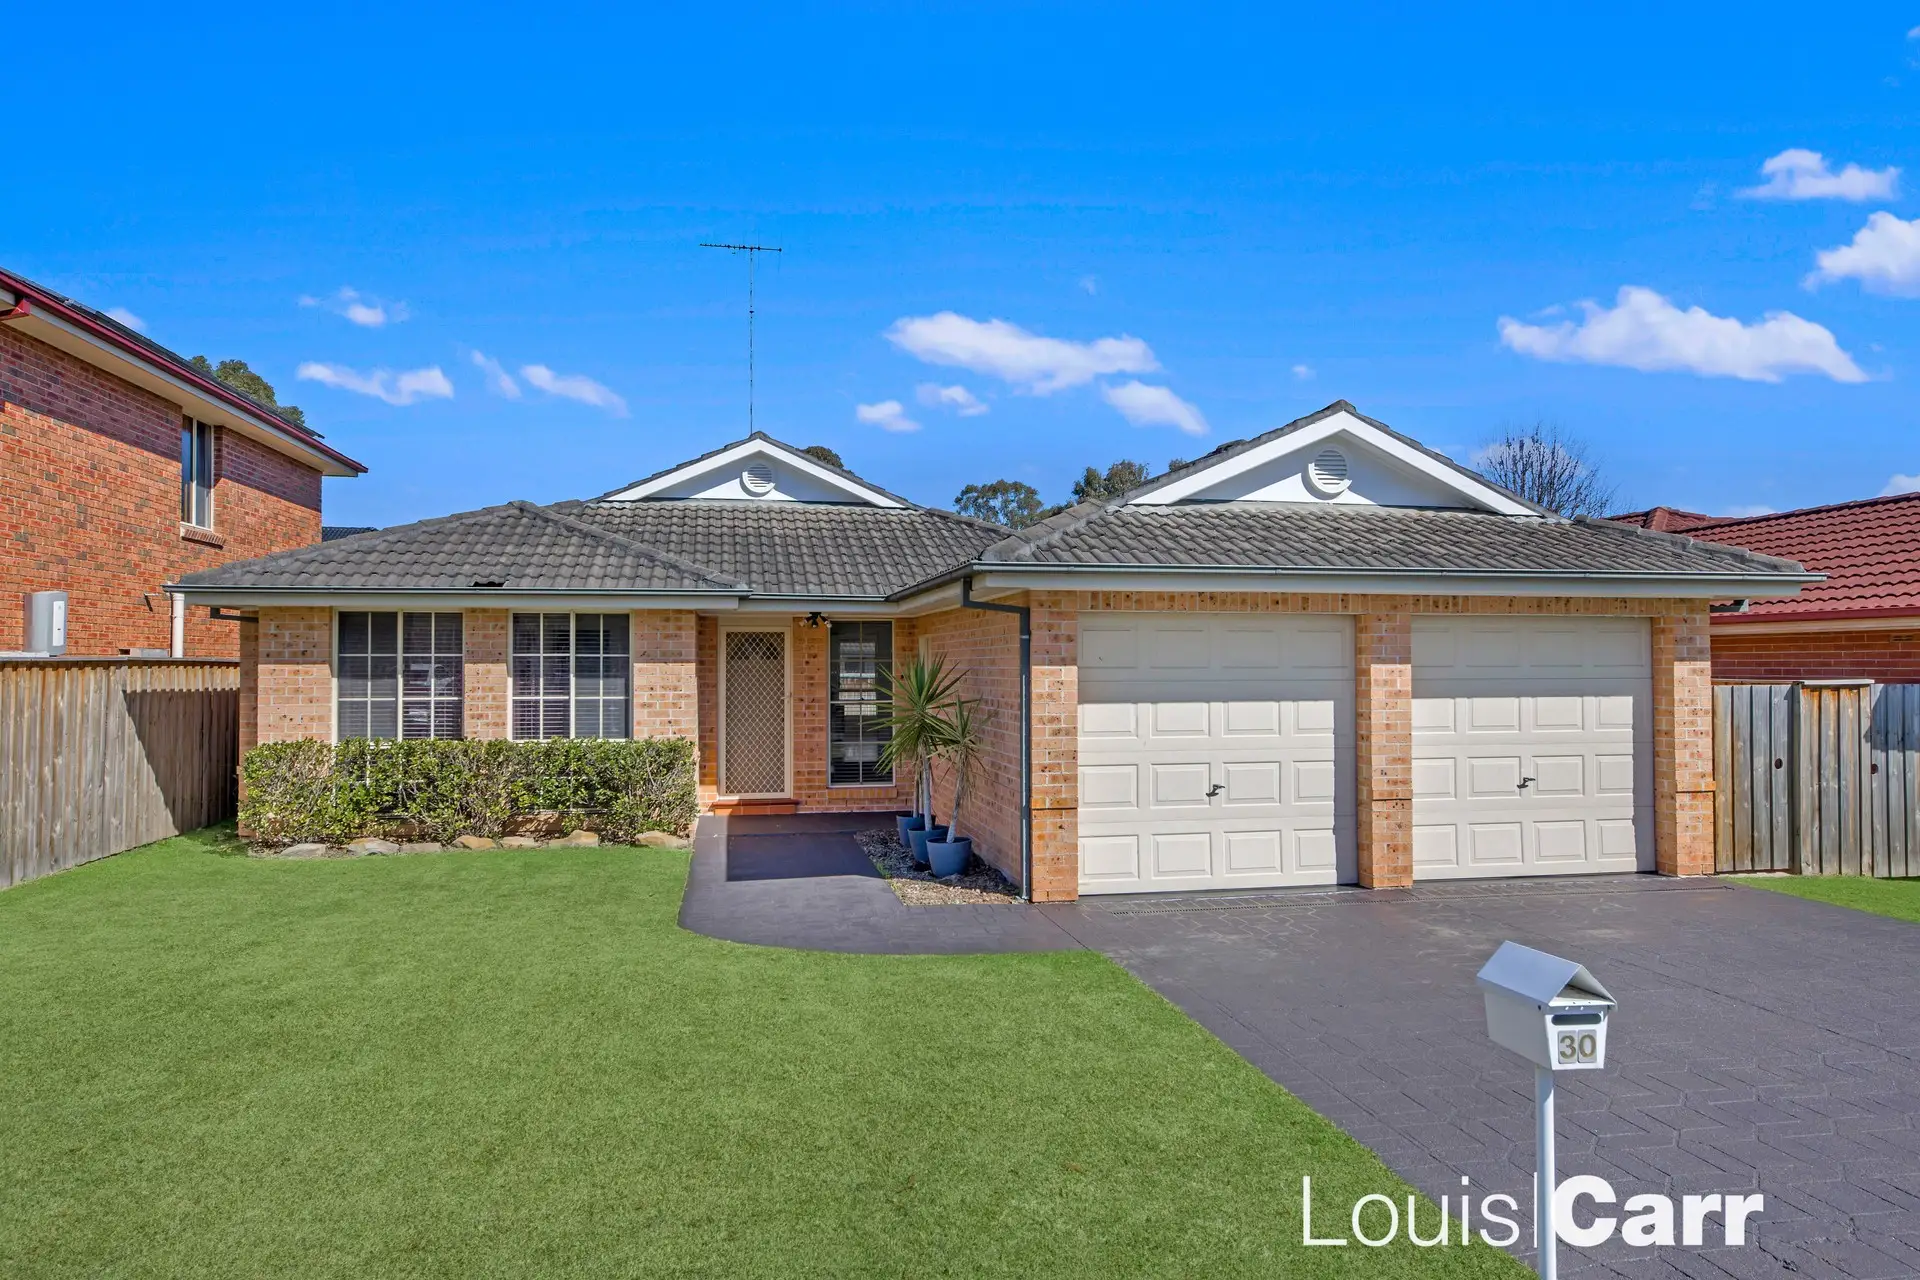 Photo #1: 30 Macquarie Avenue, Kellyville - Sold by Louis Carr Real Estate